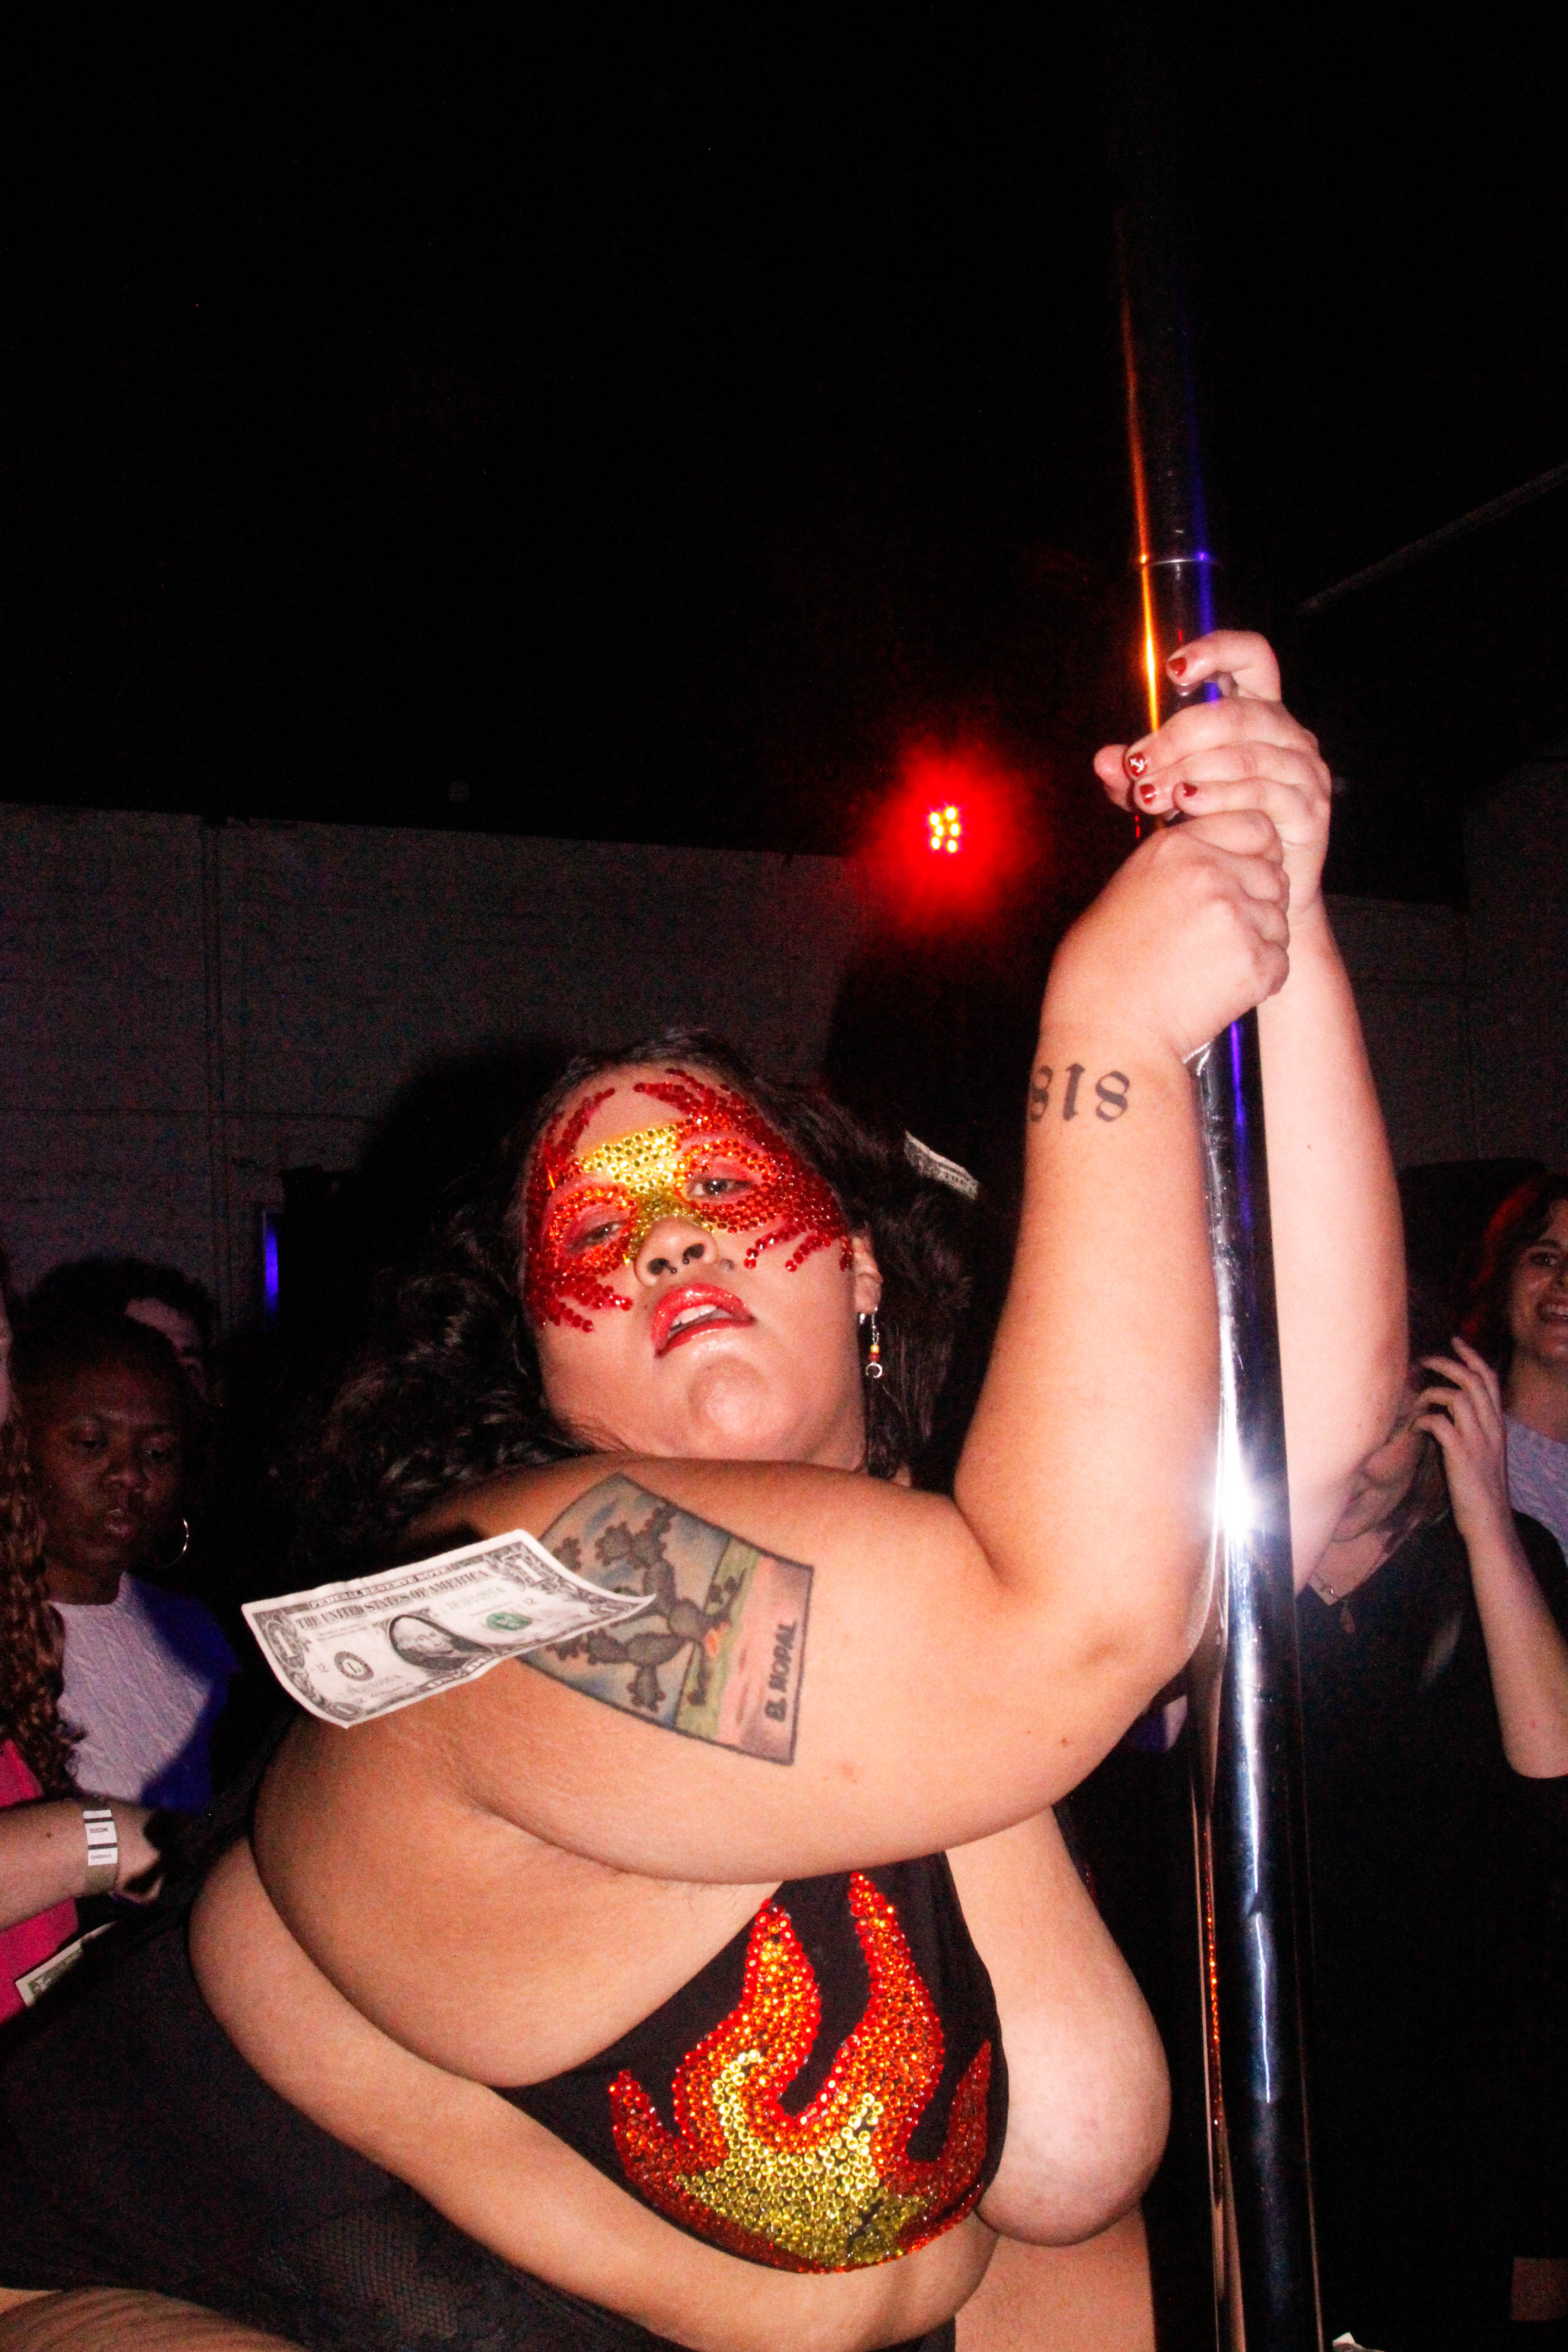 A stripper in a msk, clinging on to a pole